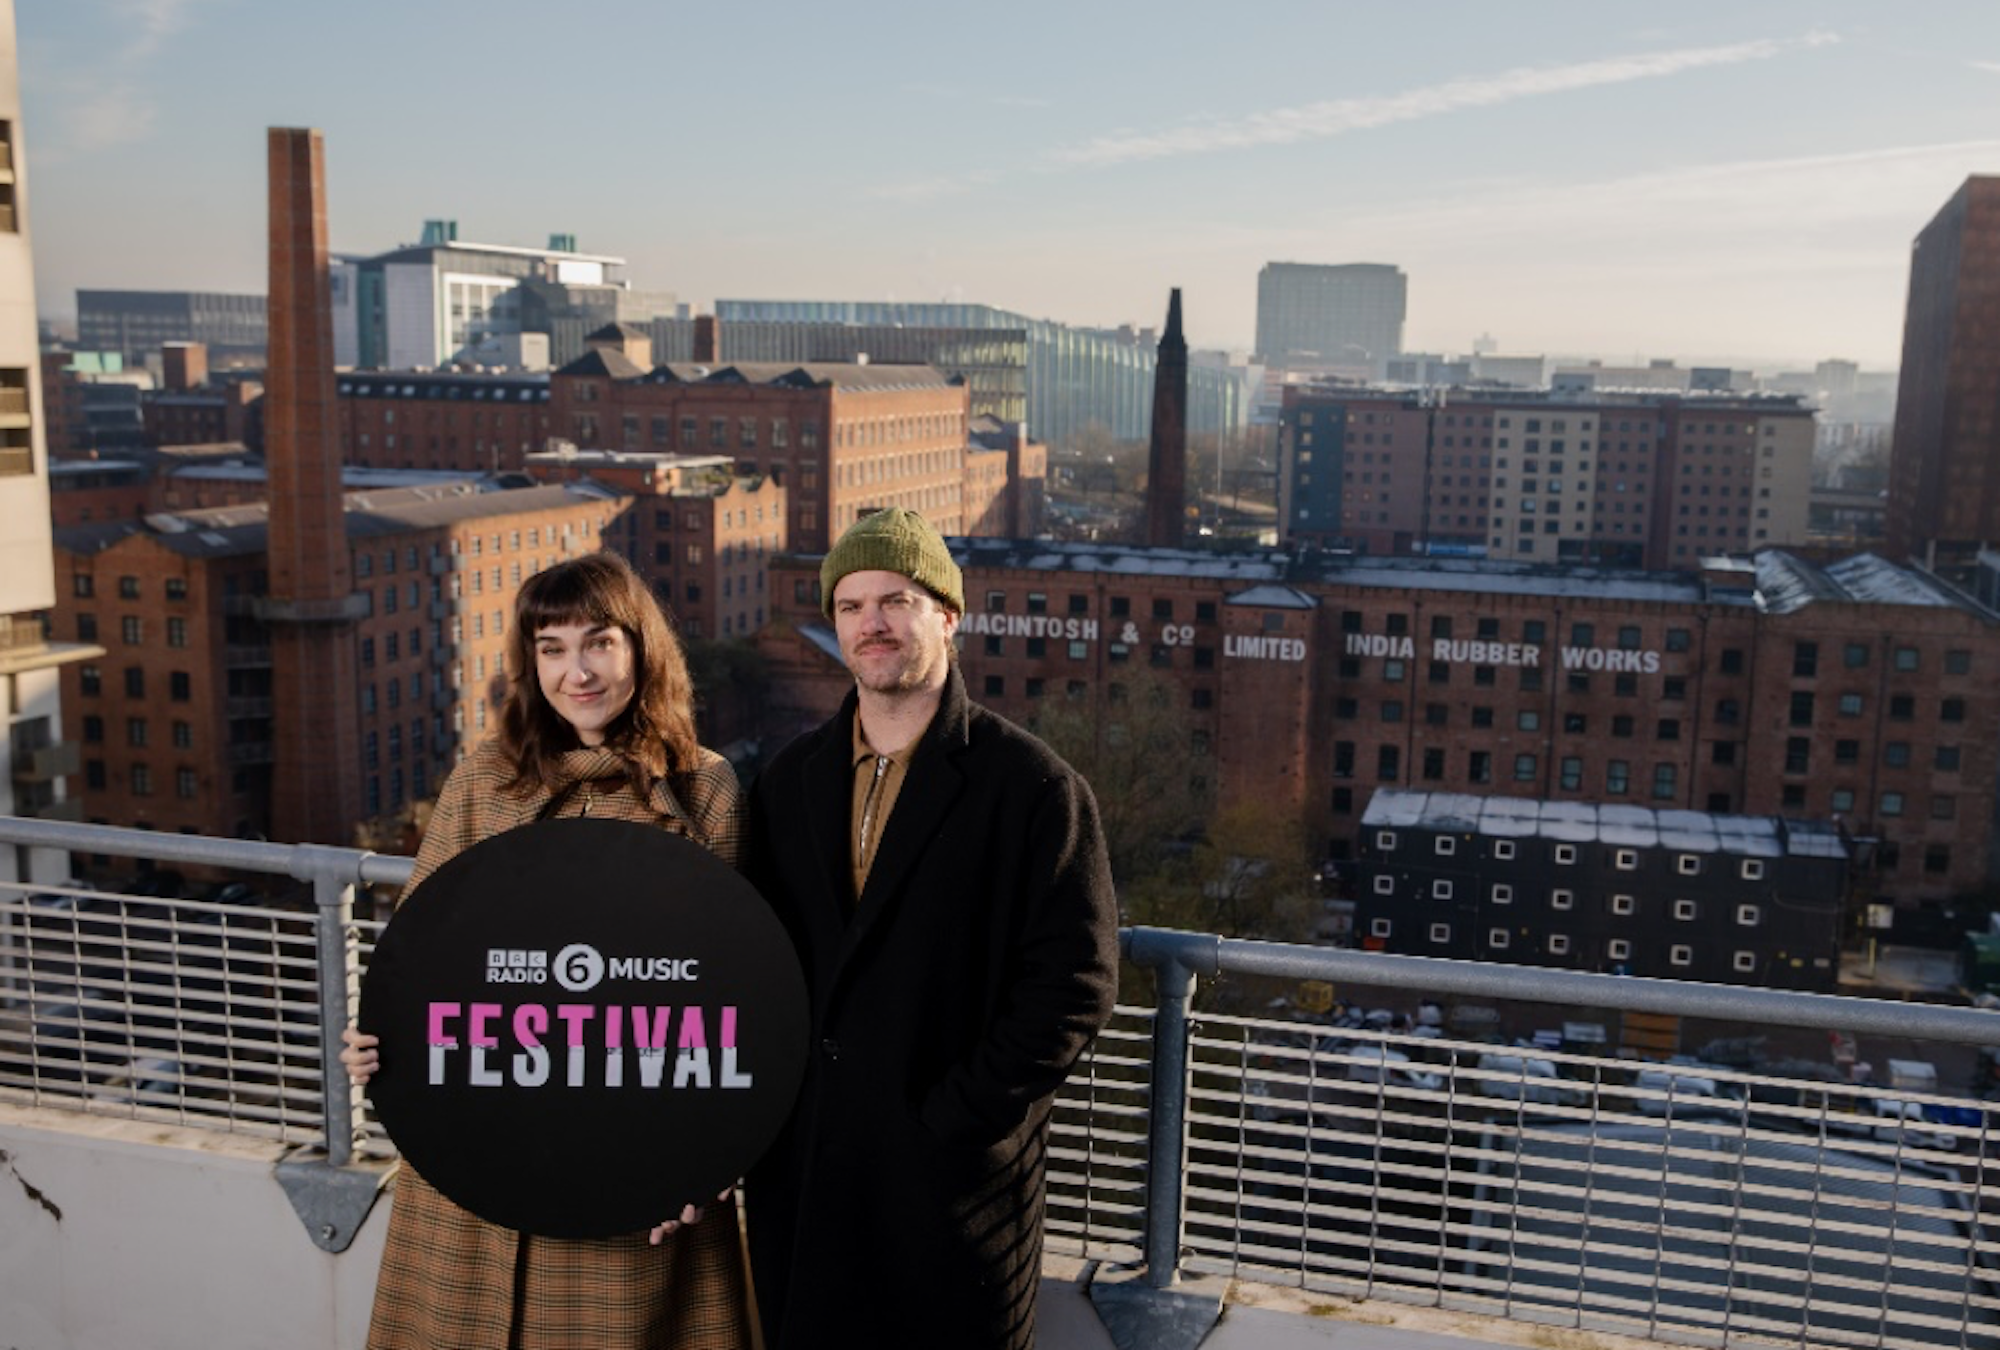 6 Music Festival takes place across the city this weekend